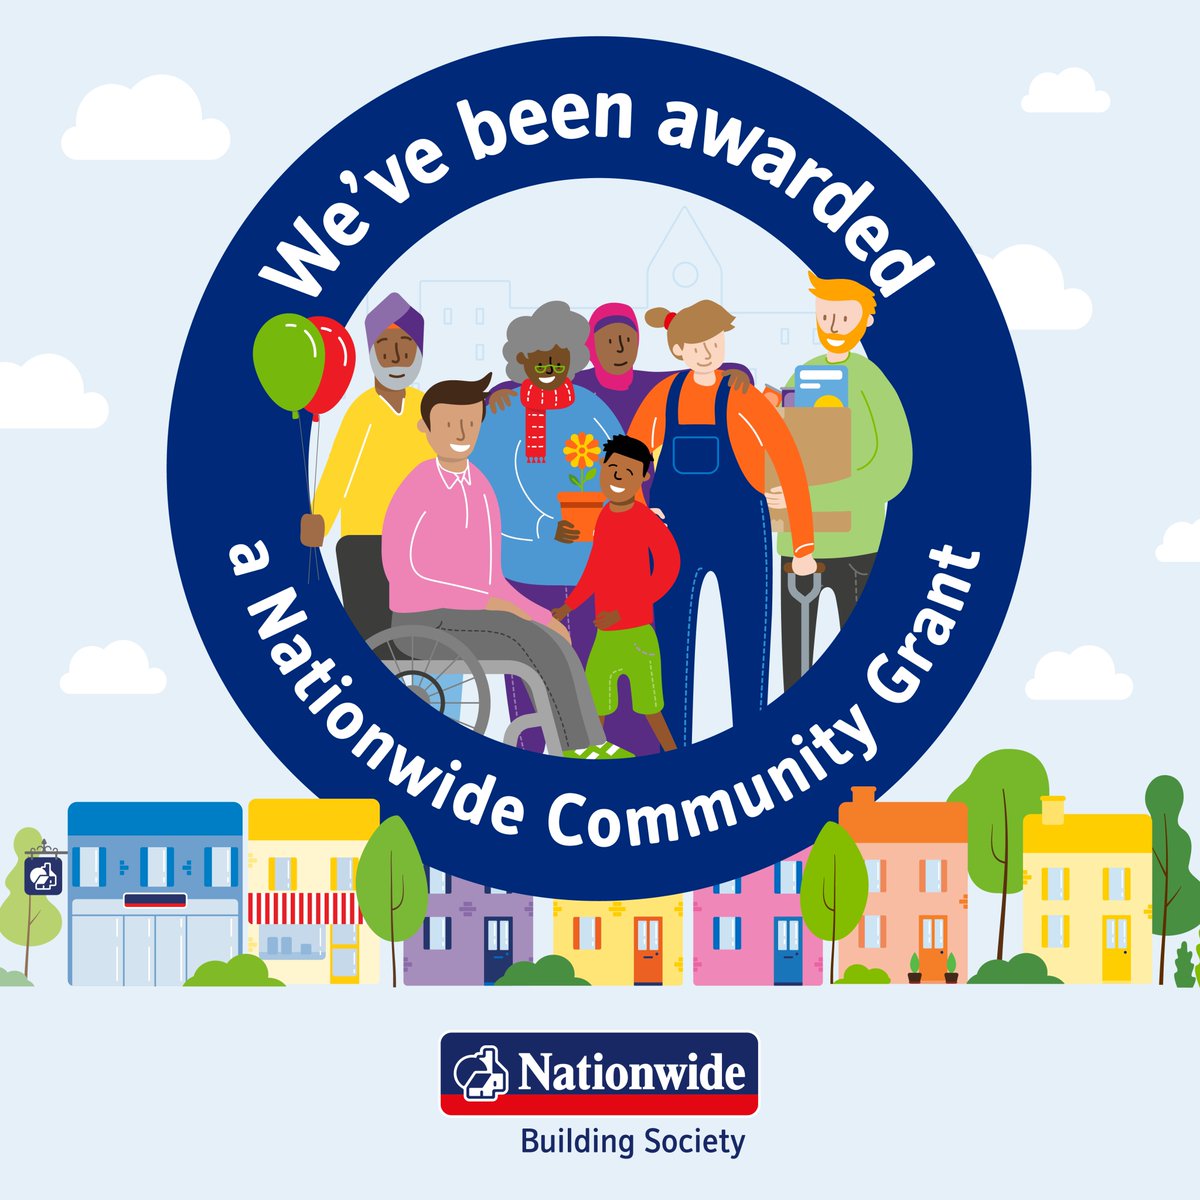 With the #costoflivingcriis deepening, we are so grateful to have secured a #CommunityGrant from @AskNationwide to provide a money advisor at our Advice Hub. #moneyworries #debt #homelessness